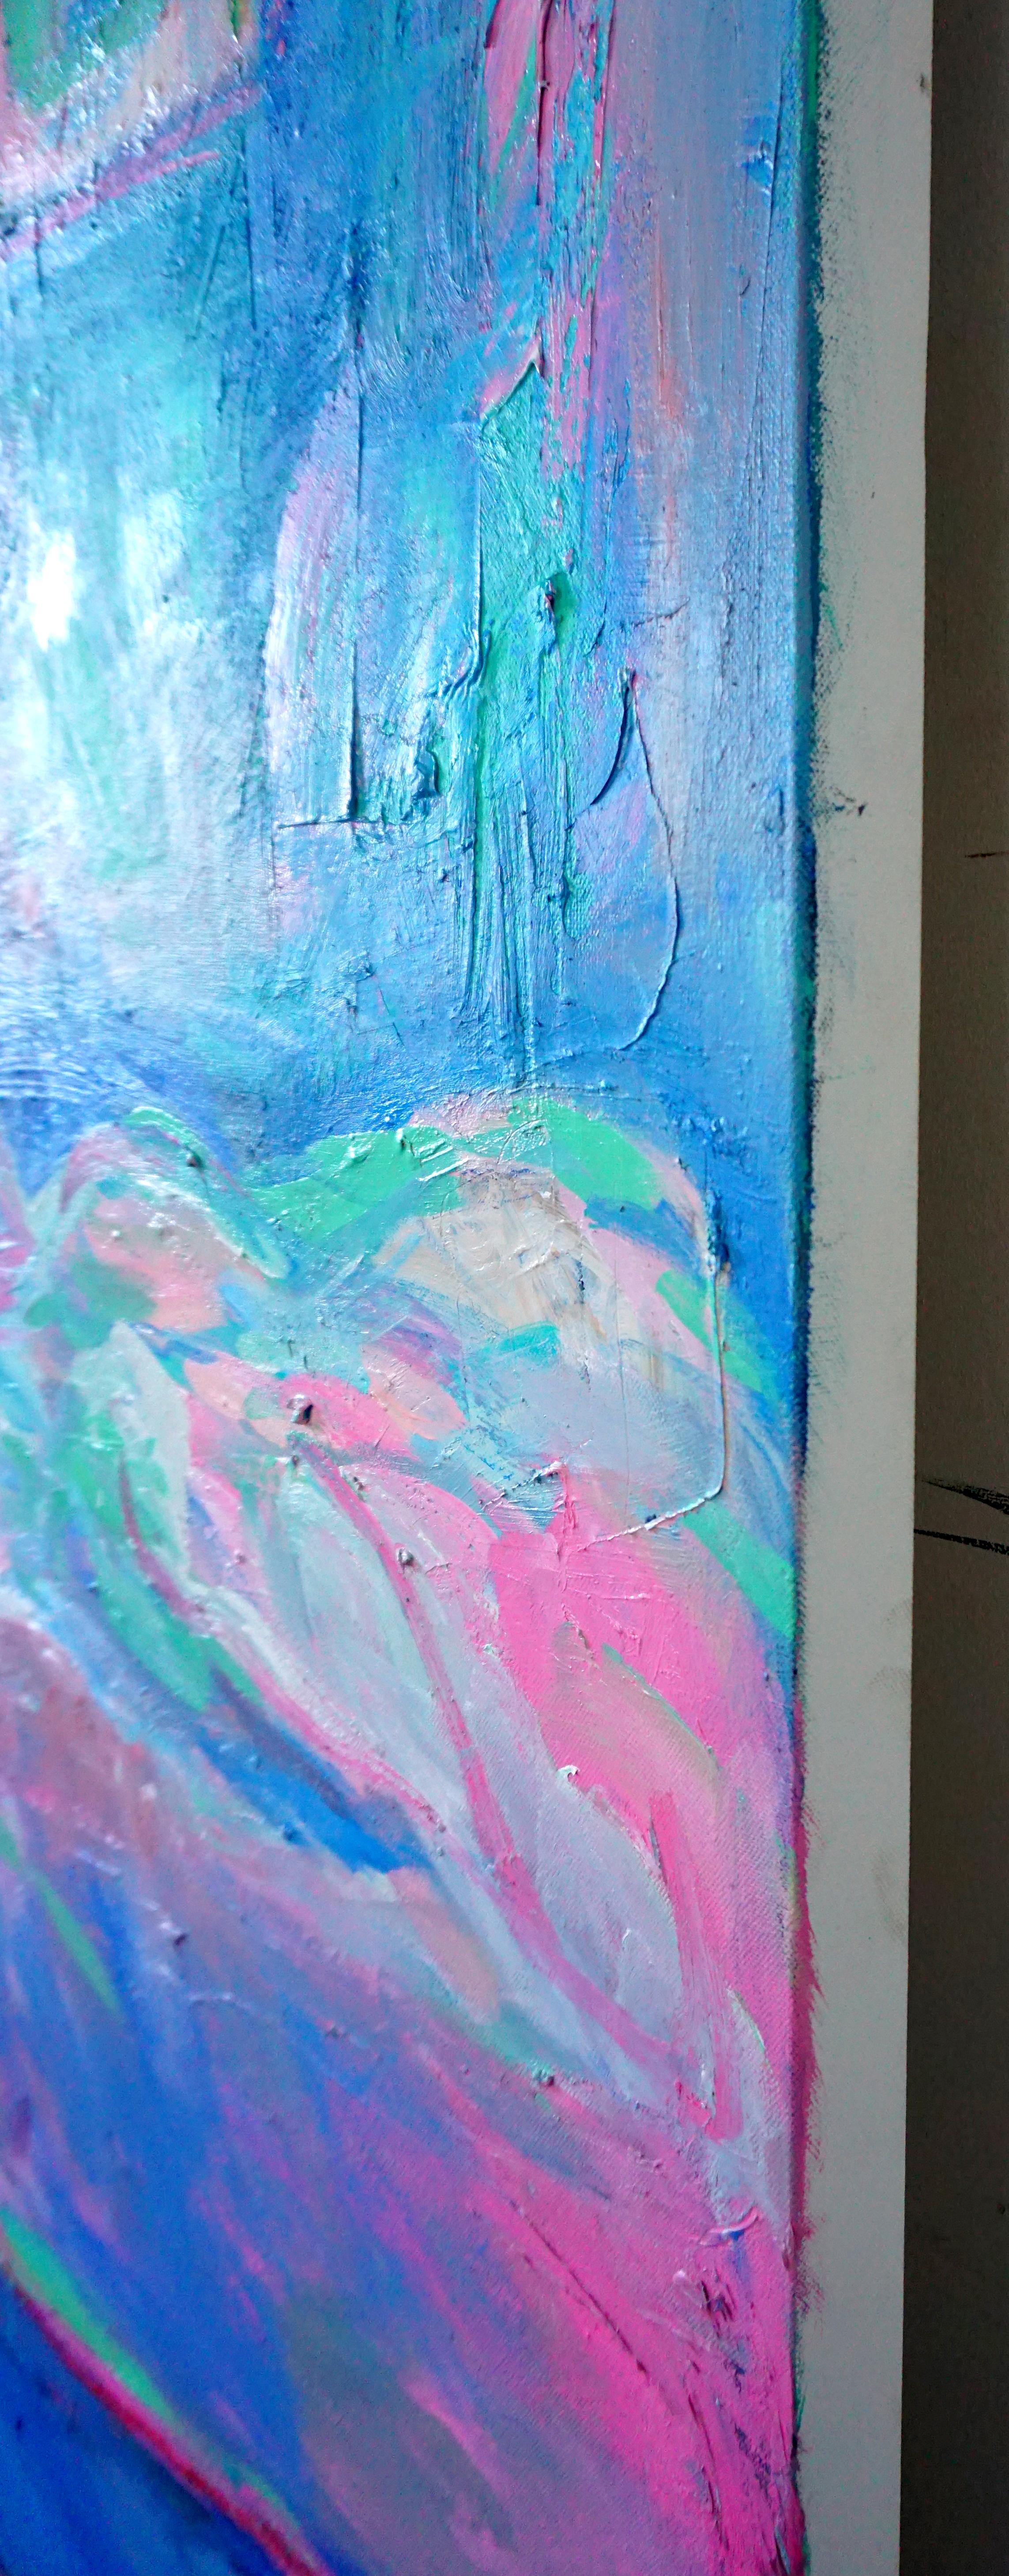 Beginning, Large oil painting w pastel palette, blue & pink of bedroom interior - Painting by Ekaterina Popova